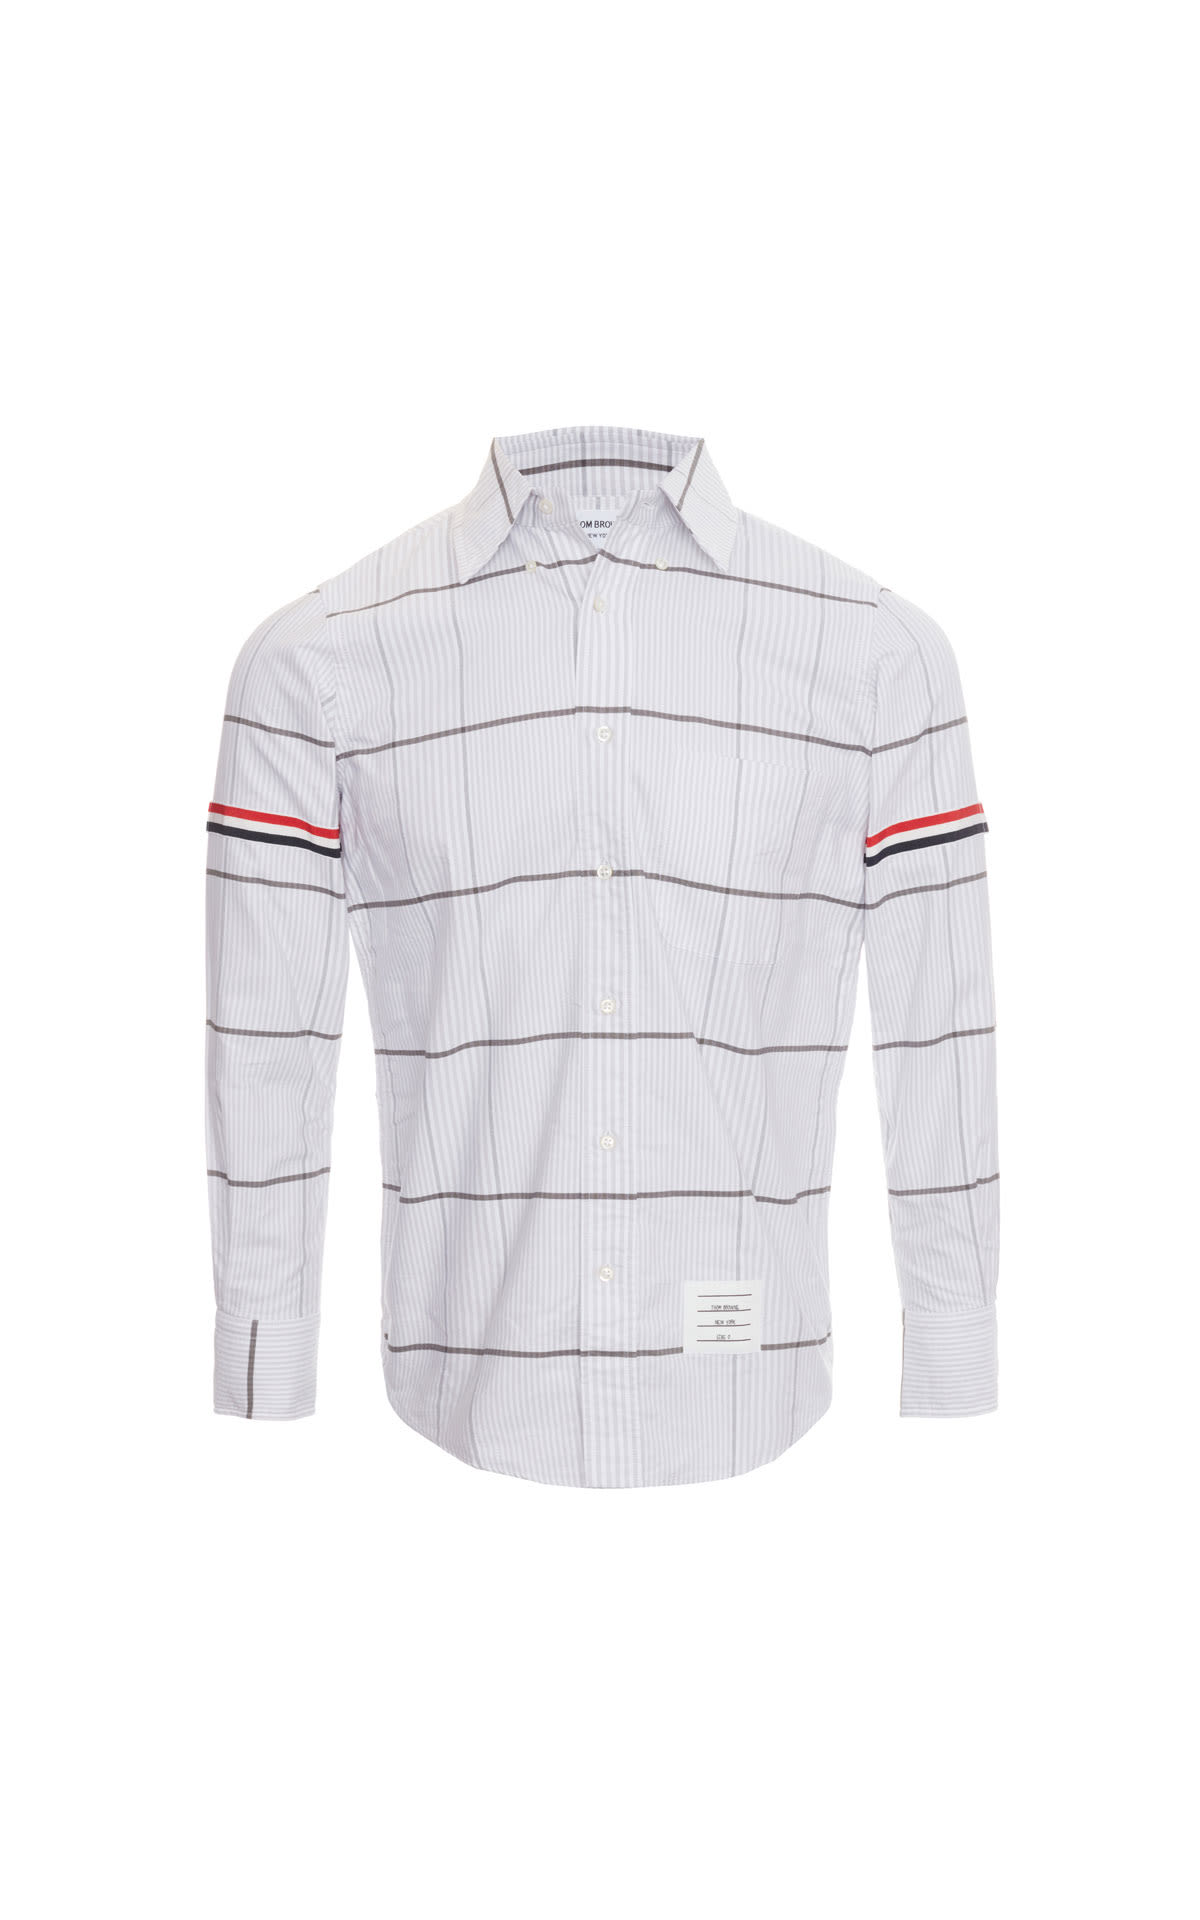 Thom Browne Oversized check shirt from Bicester Village